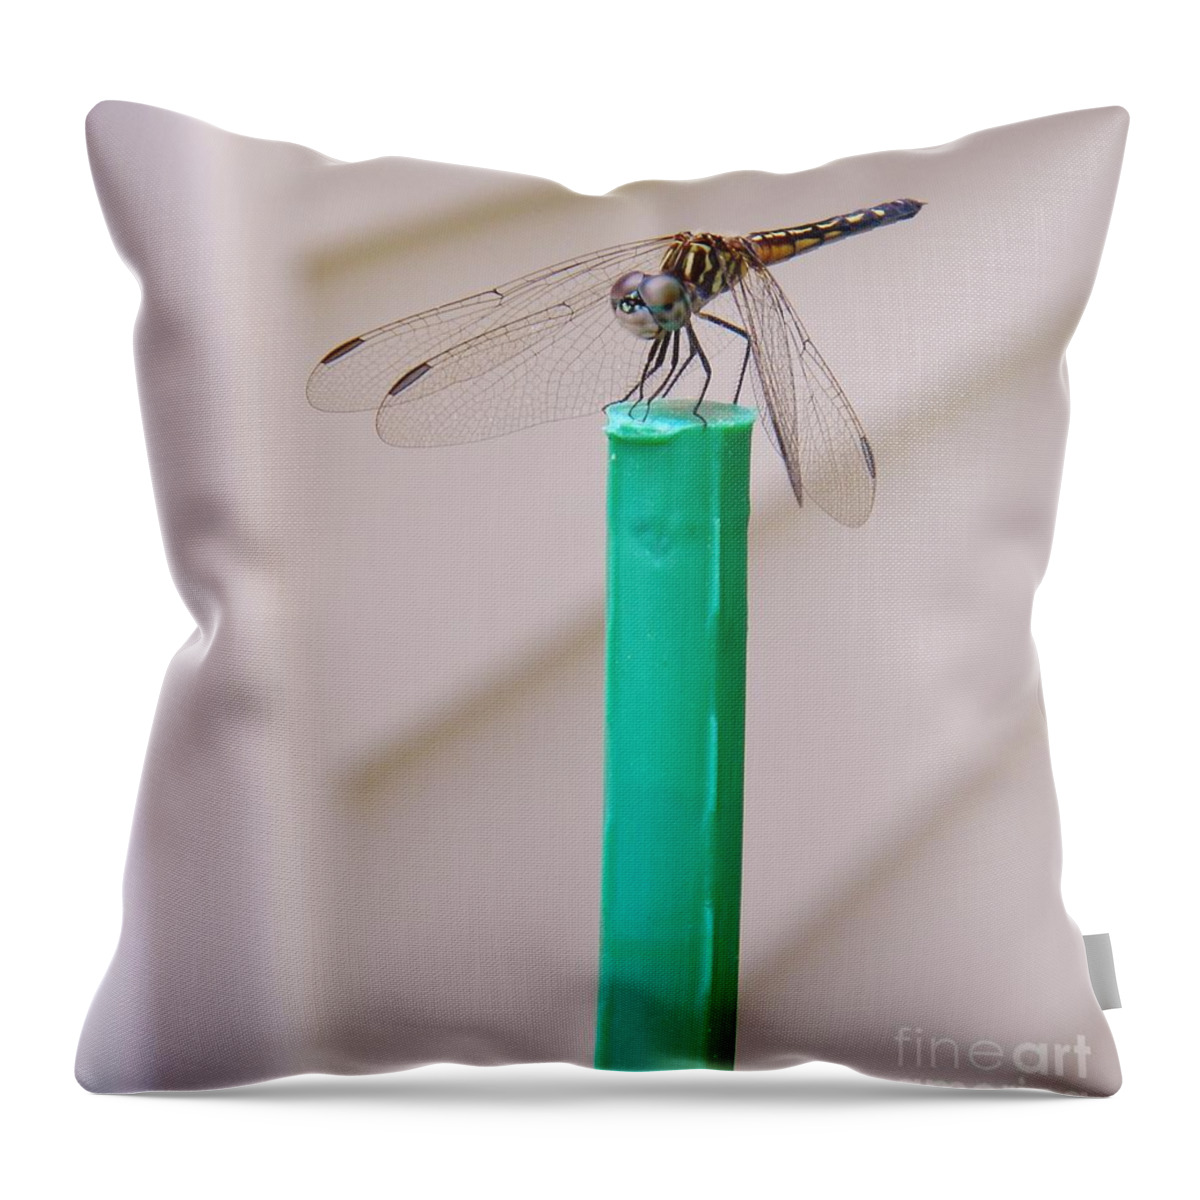 Drafonfly Throw Pillow featuring the photograph Colors Of Summer by Matthew Seufer